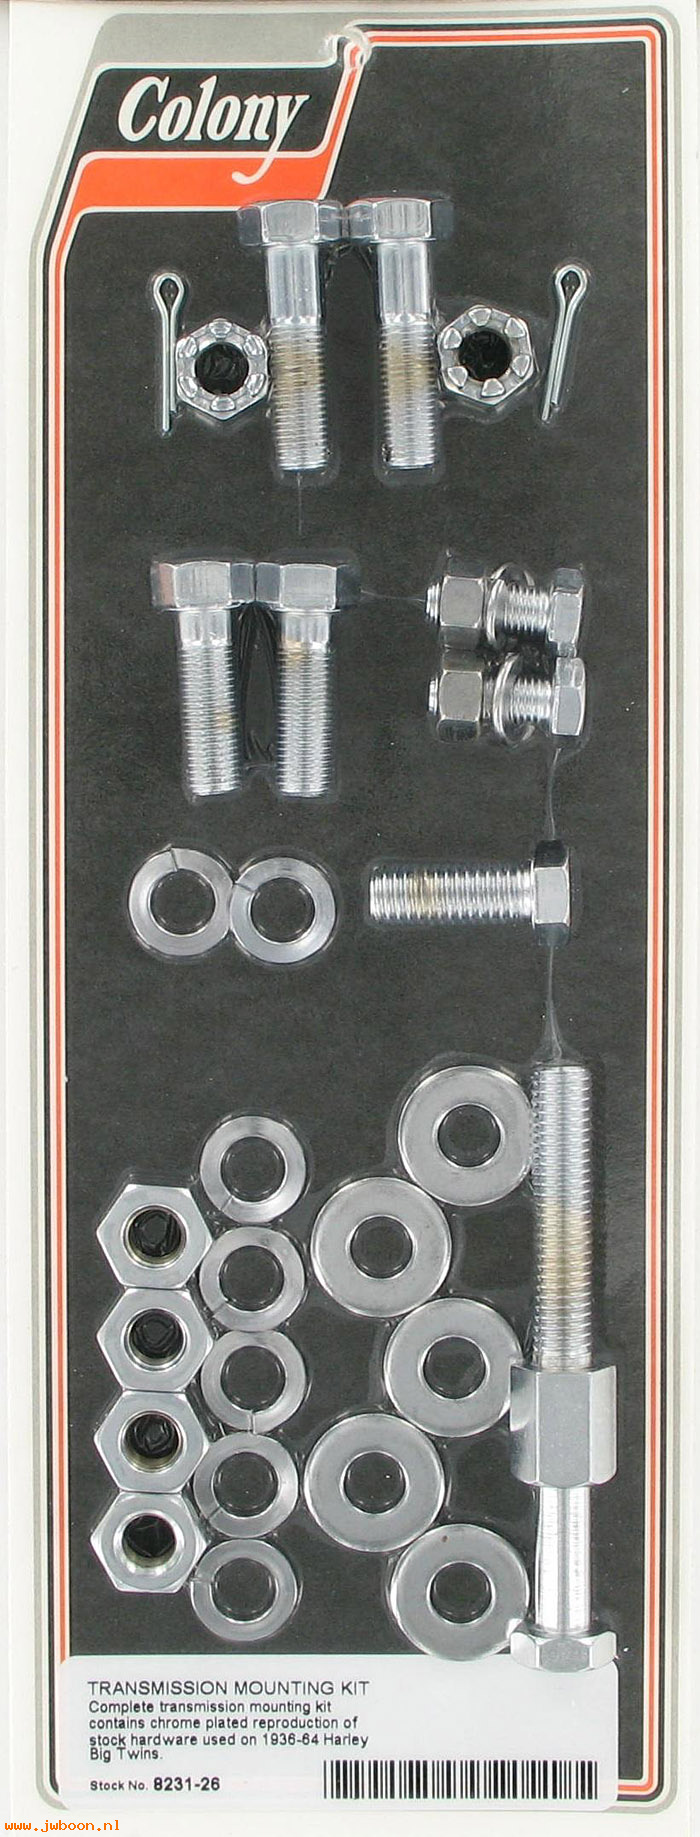 C 8231-26 (34735-36 / 7796): Transmission mounting kit - Big Twins '36-'64, in stock, Colony